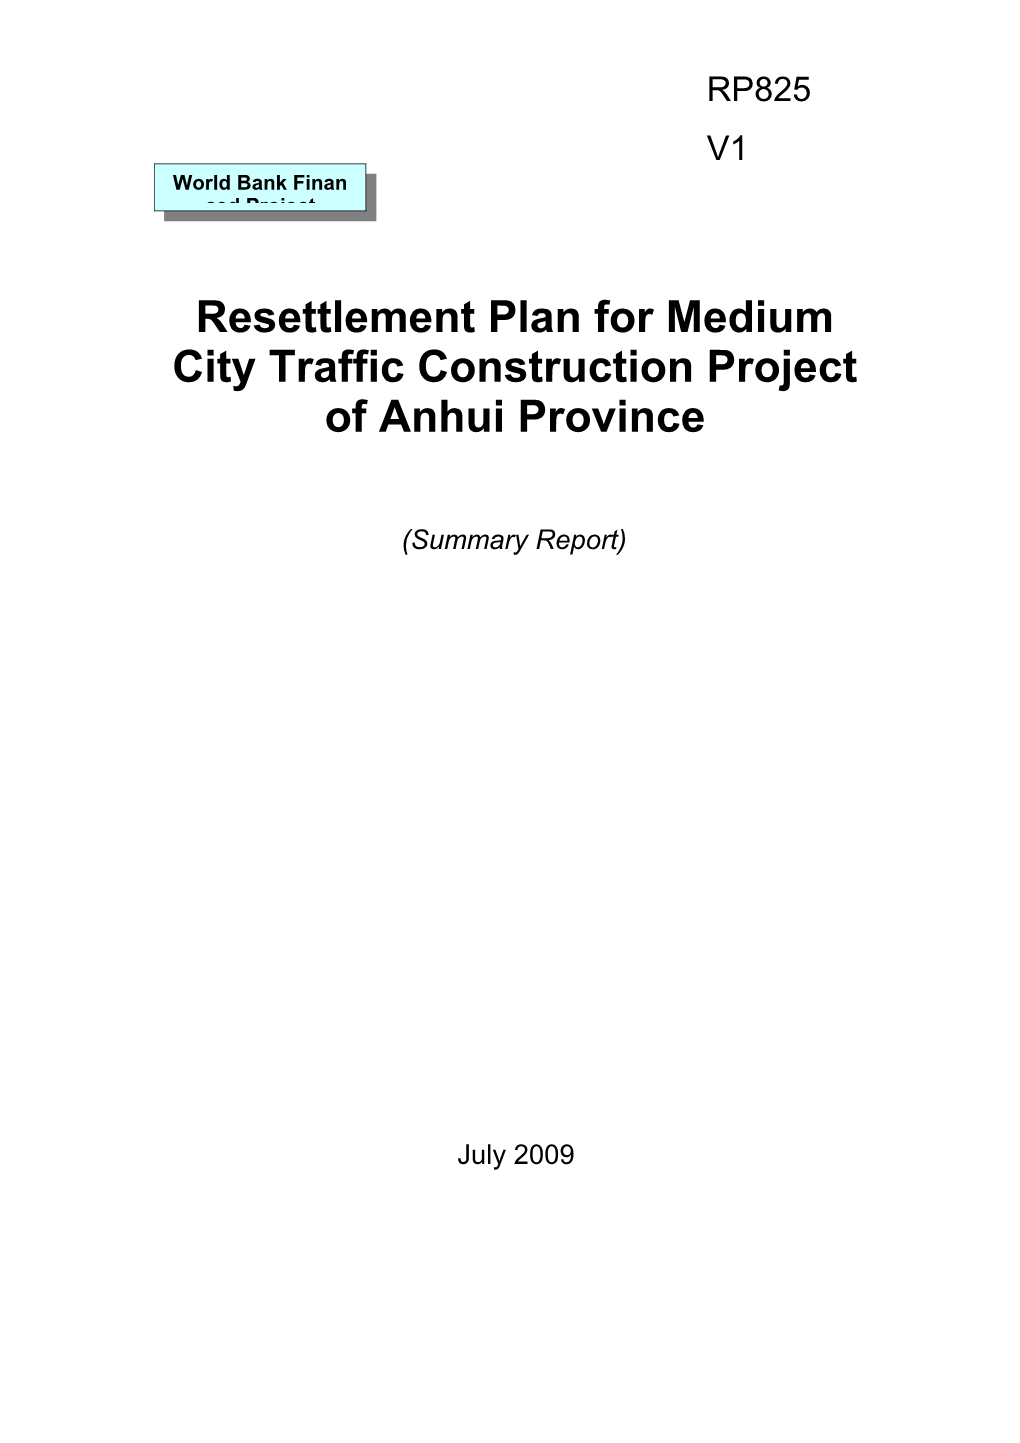 Resettlement Plan for Medium City Traffic Construction Project of Anhui Province s1